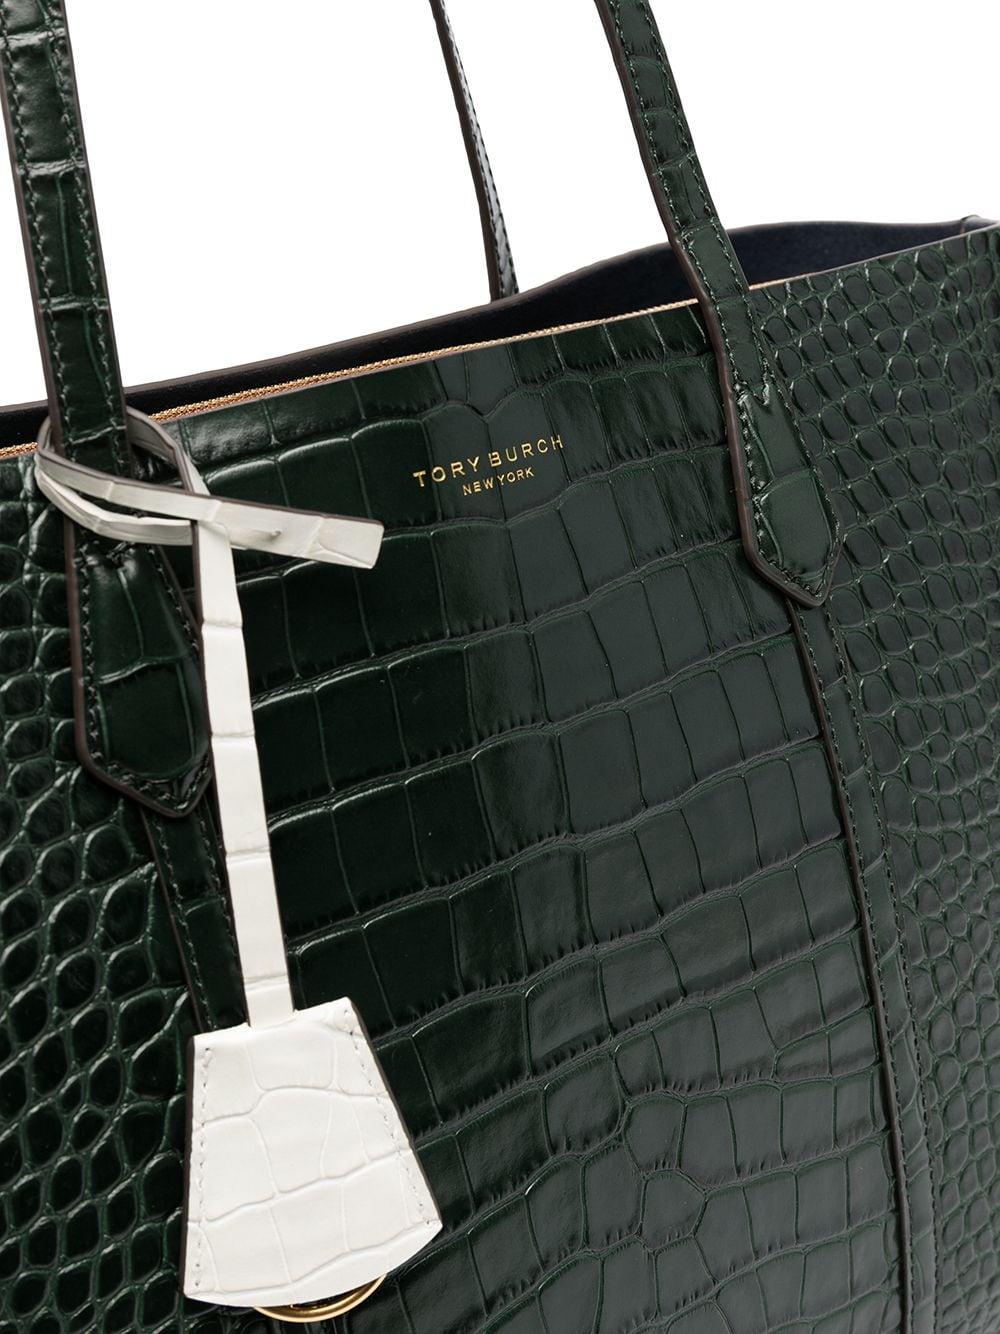 Tory Burch on X: Our new Perry tote in croc-embossed leather  #ToryBurchFW20 #ToryBurch    / X